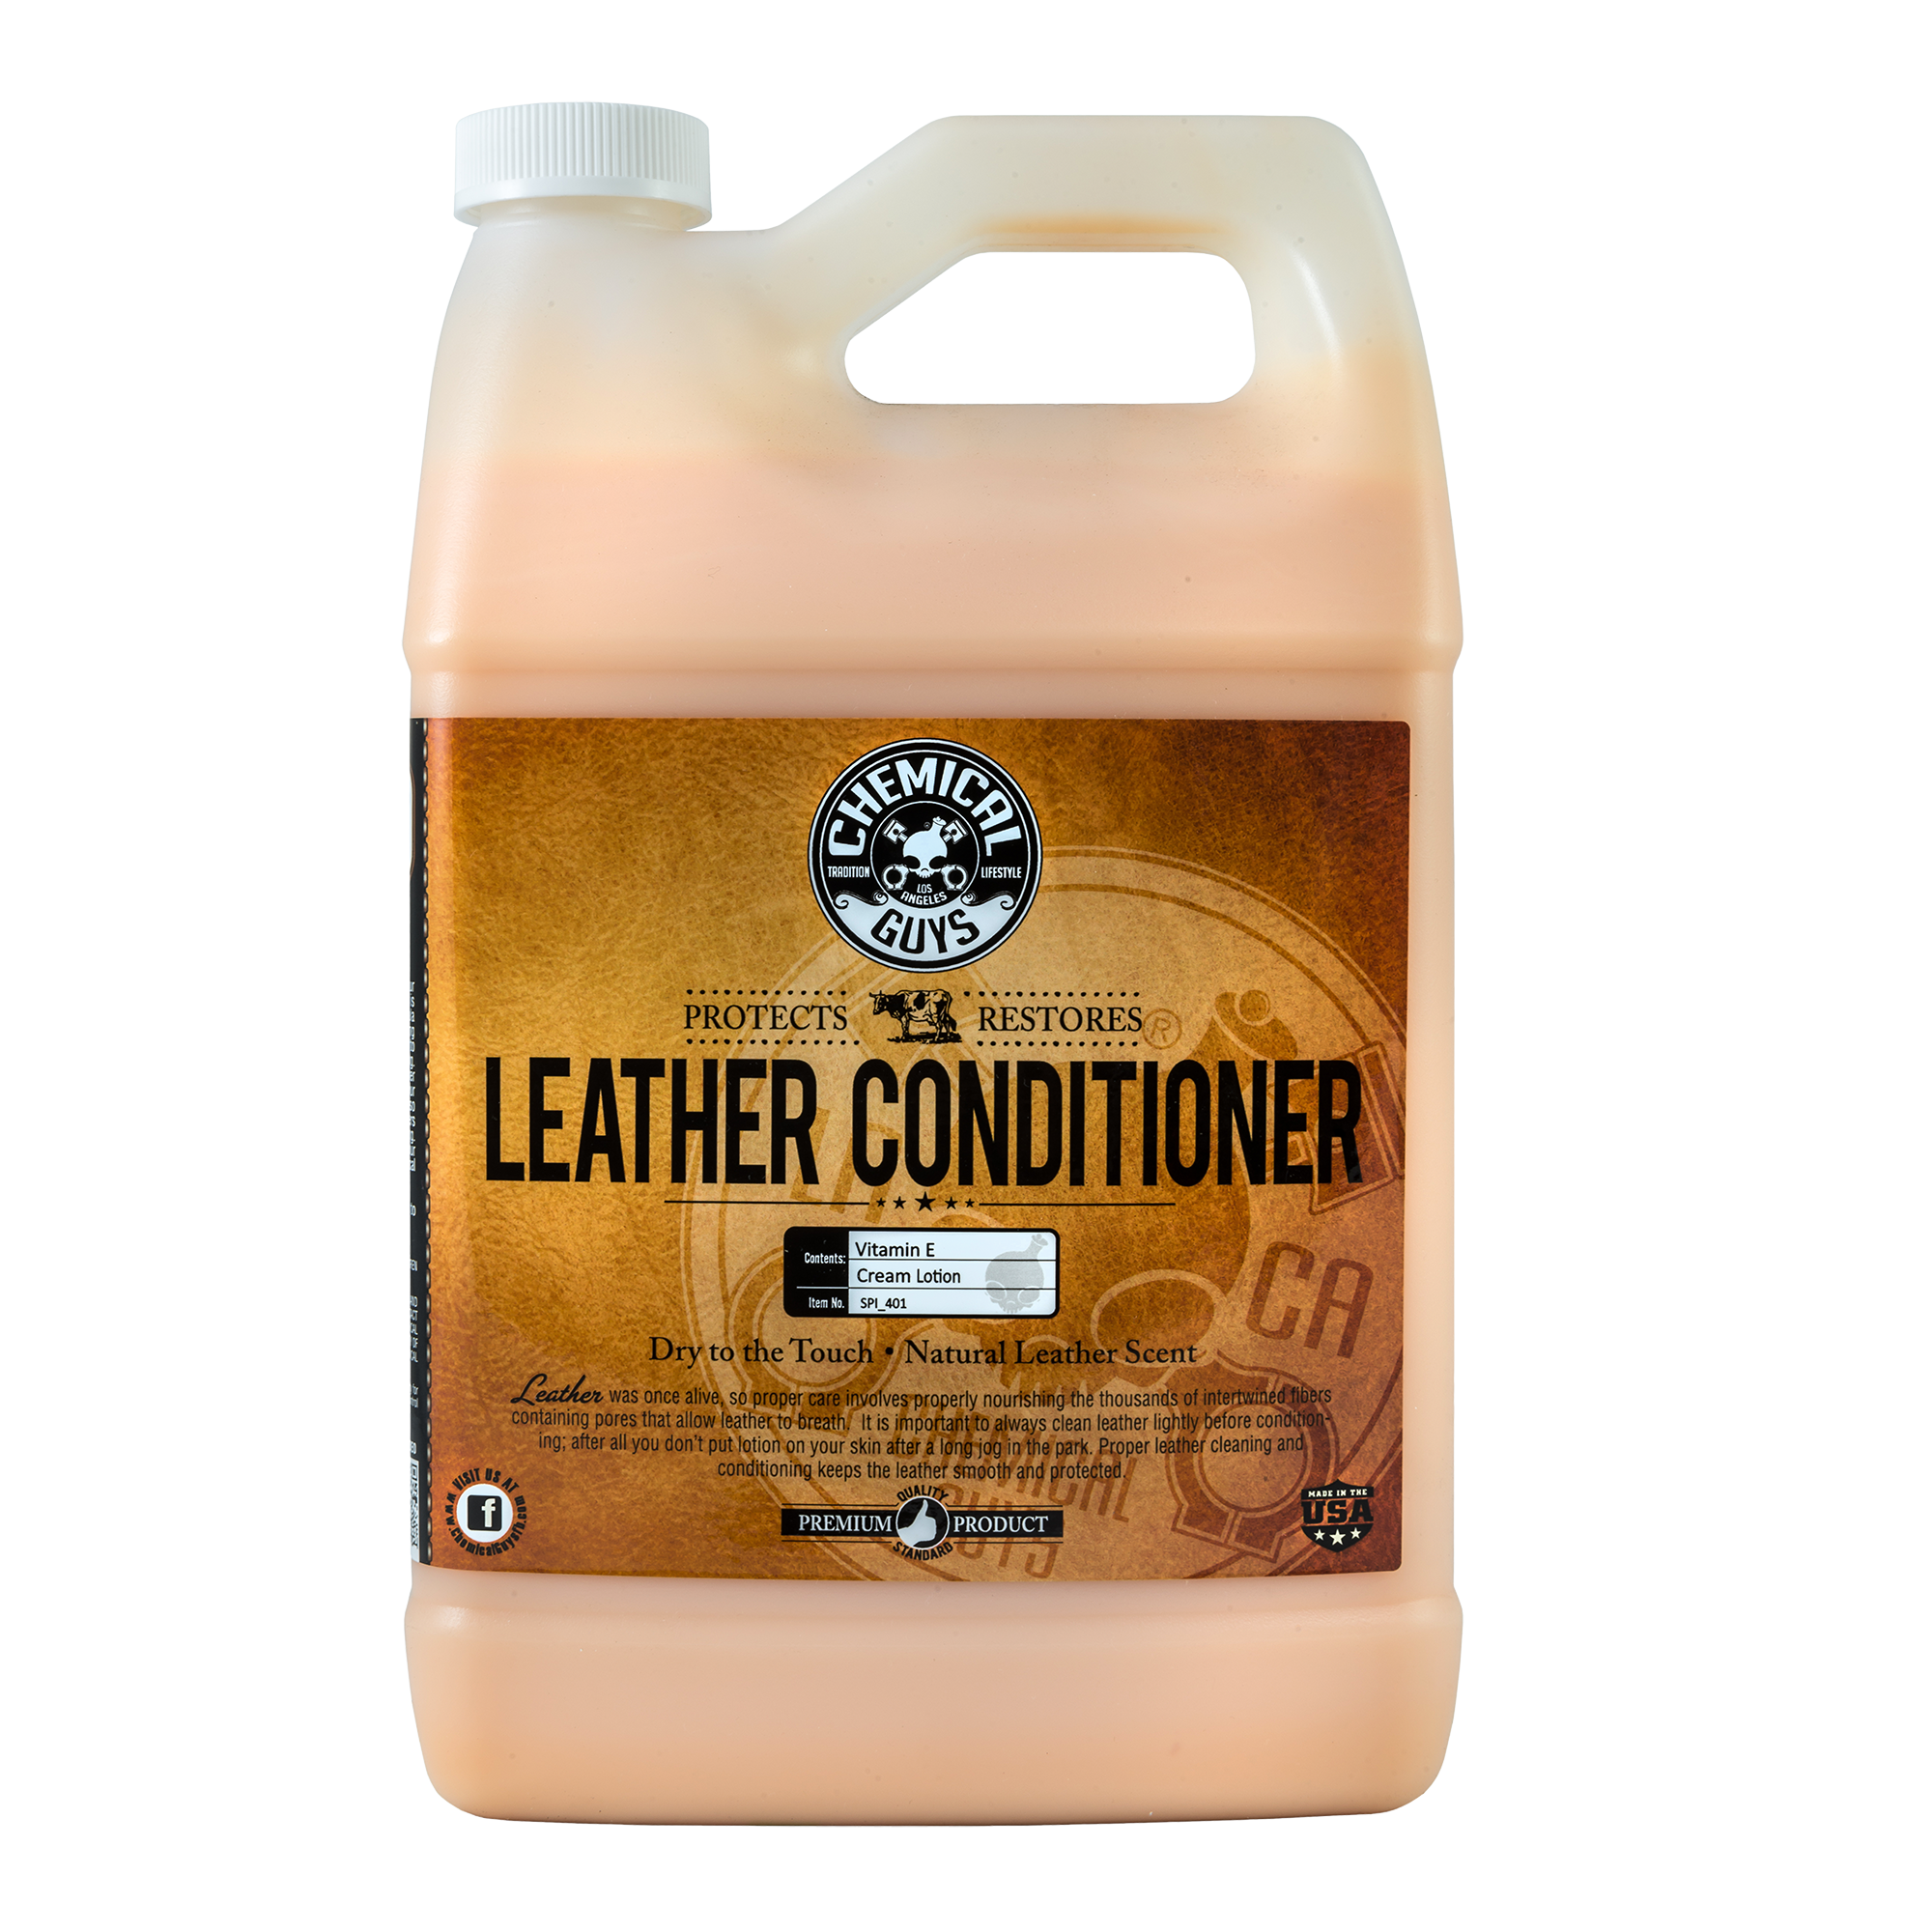 Chemical Guys - Leather check! When was the last time you cleaned and  conditioned your leather? The best way of keeping your leather looking as  great as new is by conducting routine